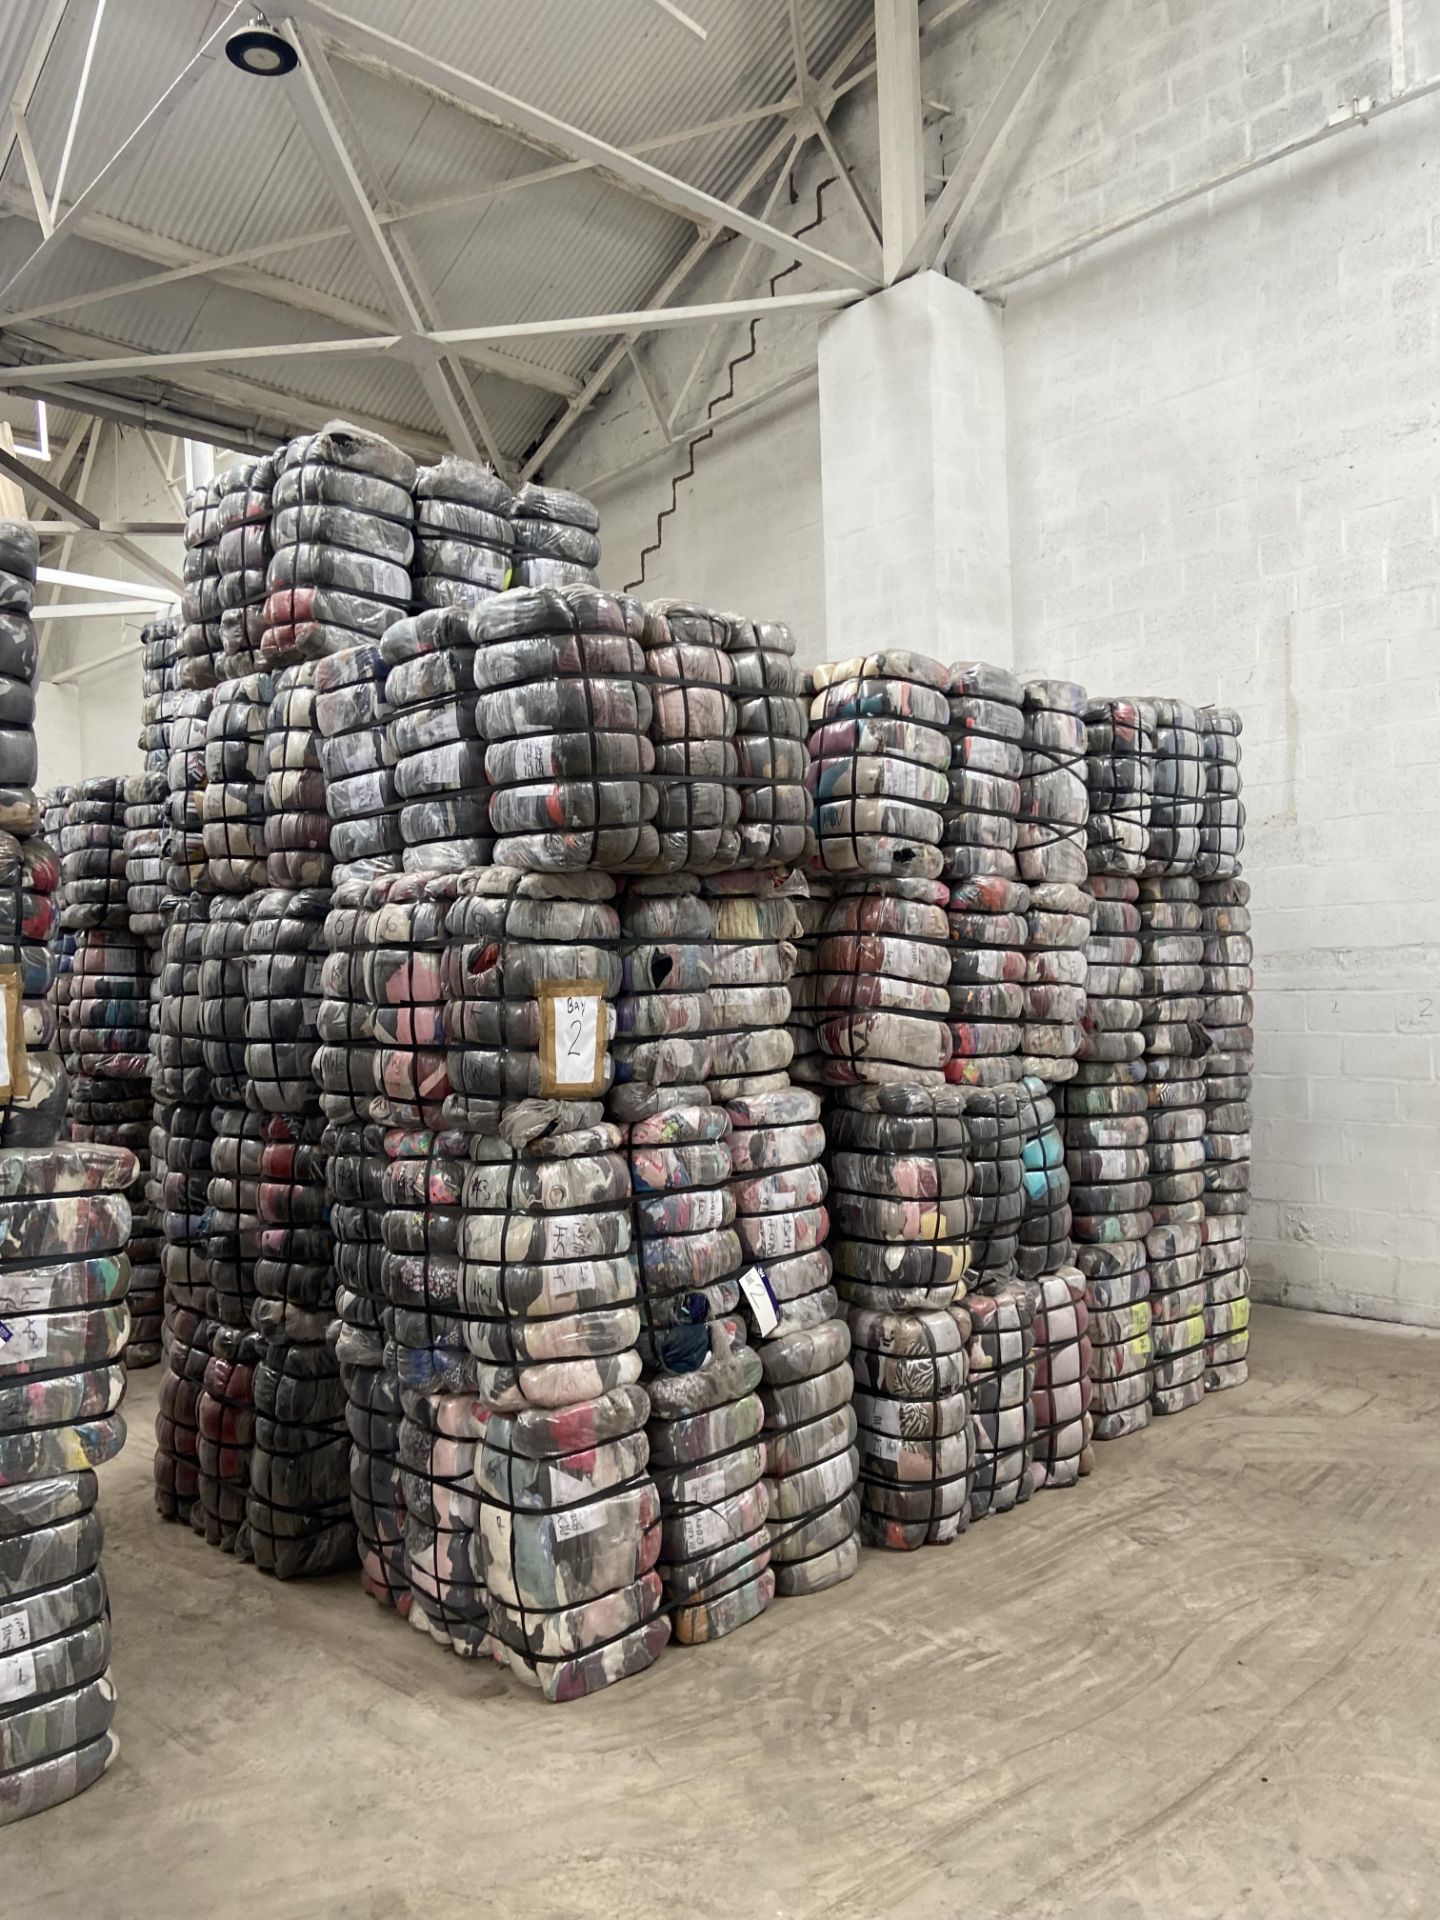 APPROX 217 BALES (9765KG) RECYCLABLE WASTE TEXTILES, understood to comprise: Four bales x 45kg Adult